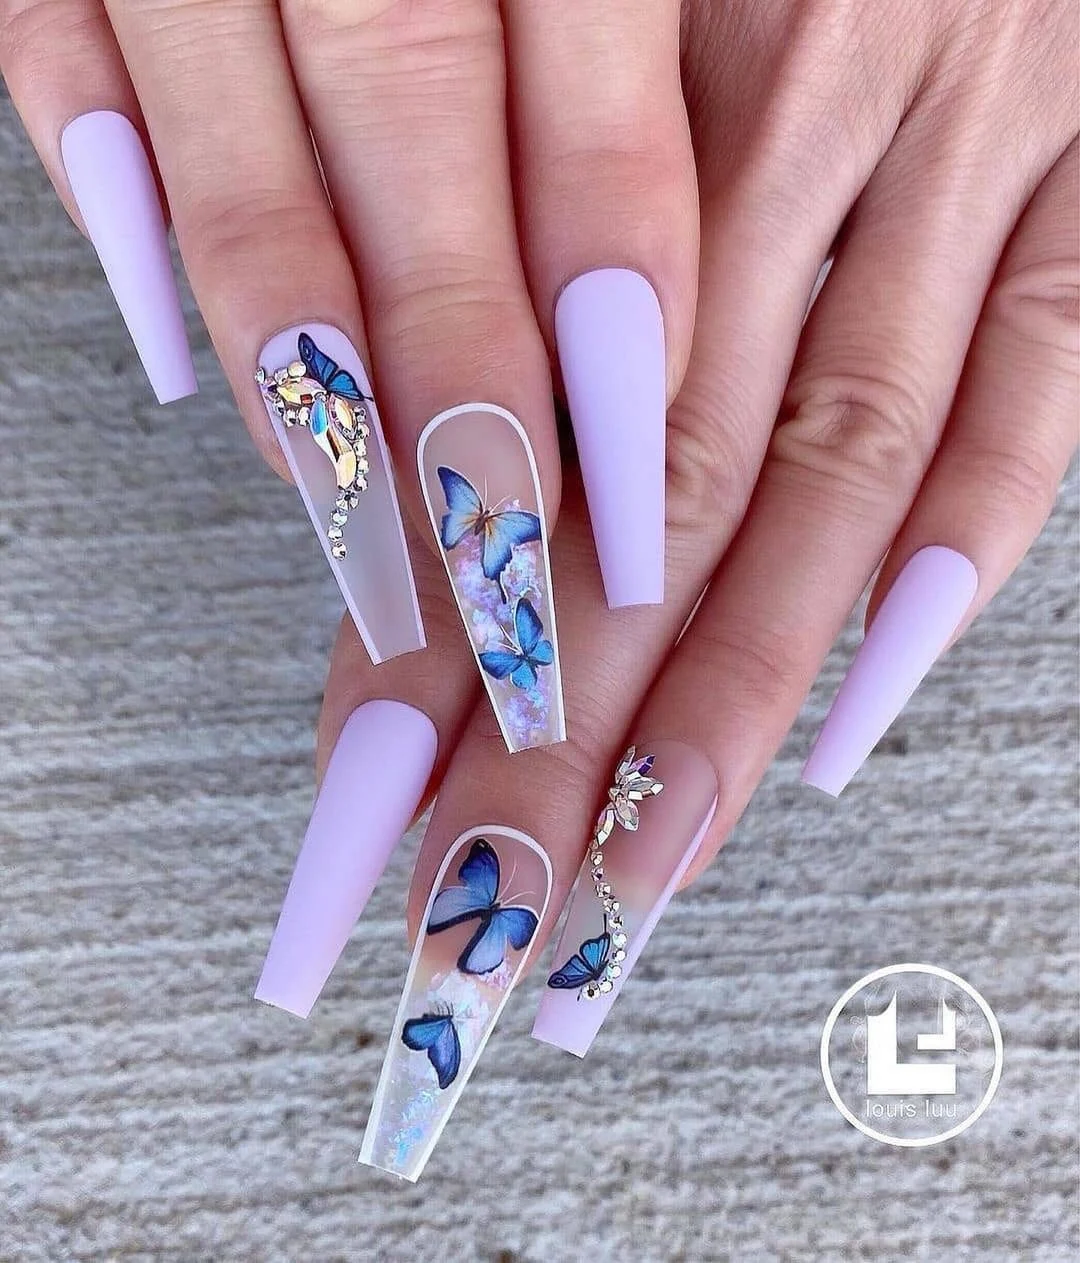 45 New spring nail art designs to try in 2021 | Melody Jacob